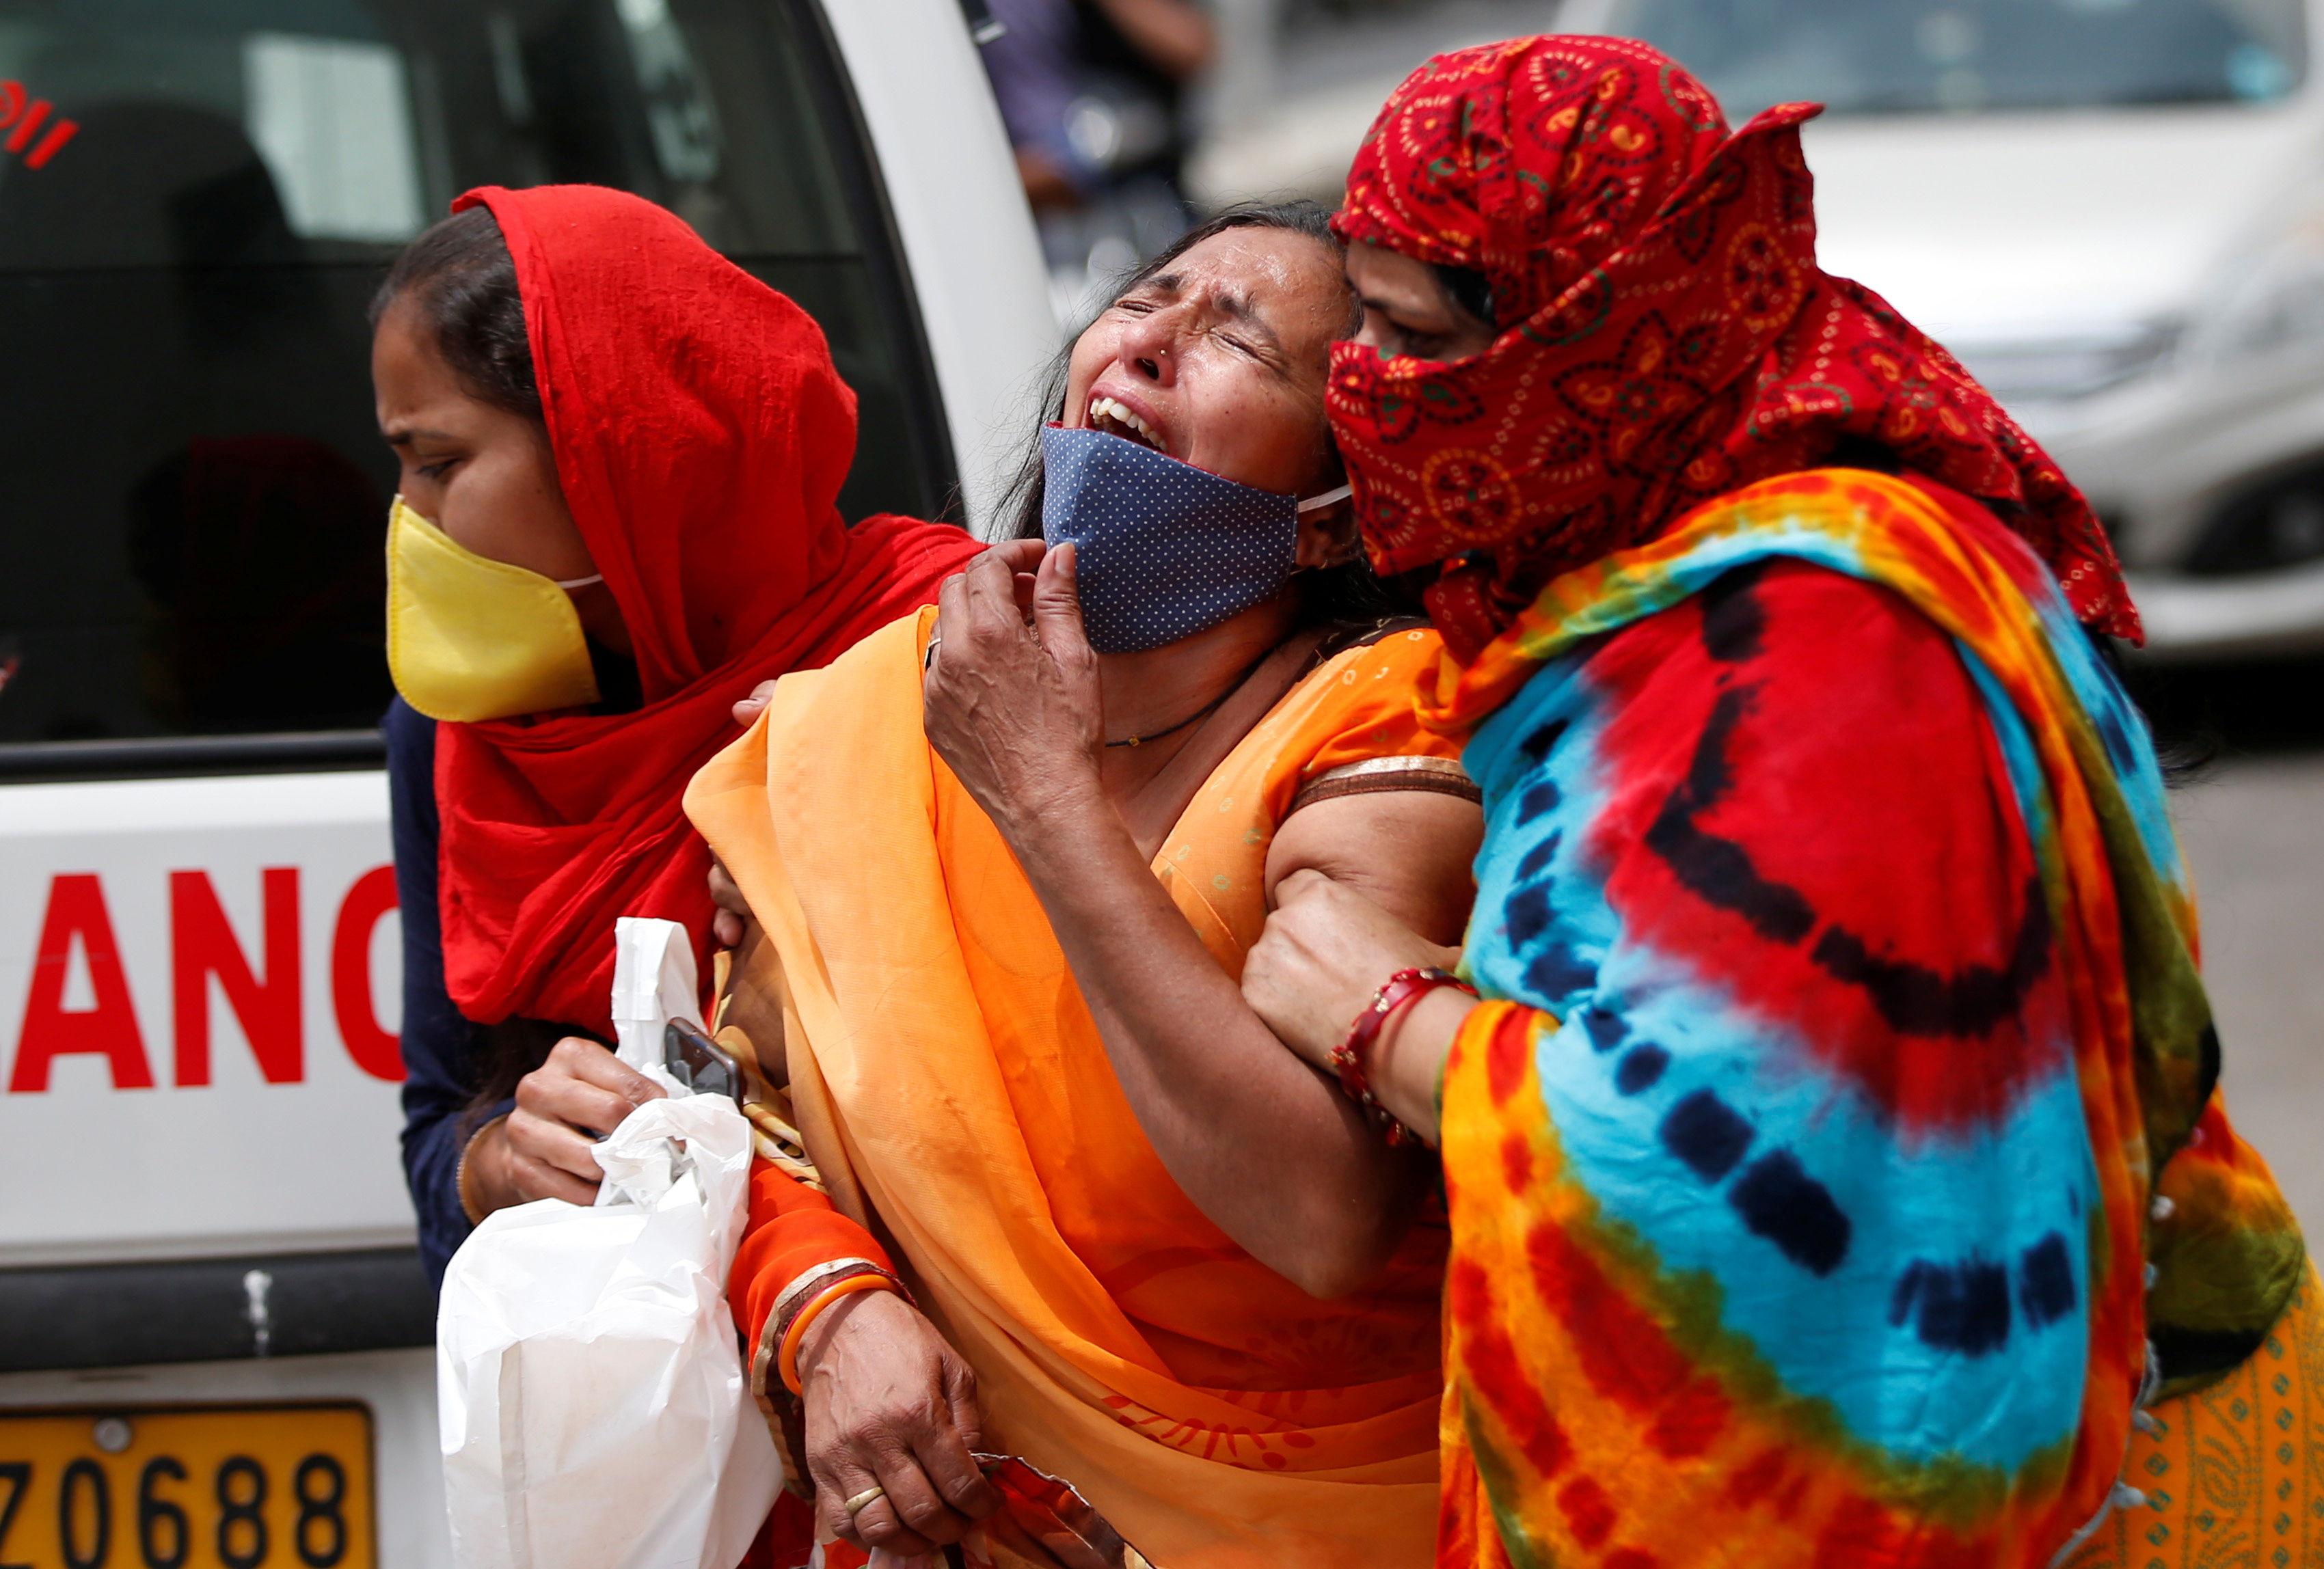 A woman is consoled after her husband died due to the coronavirus disease (COVID-19) outside a mortuary of a COVID-19 hospital in Ahmedabad, India, April 20, 2021. Source: newsindiatimes